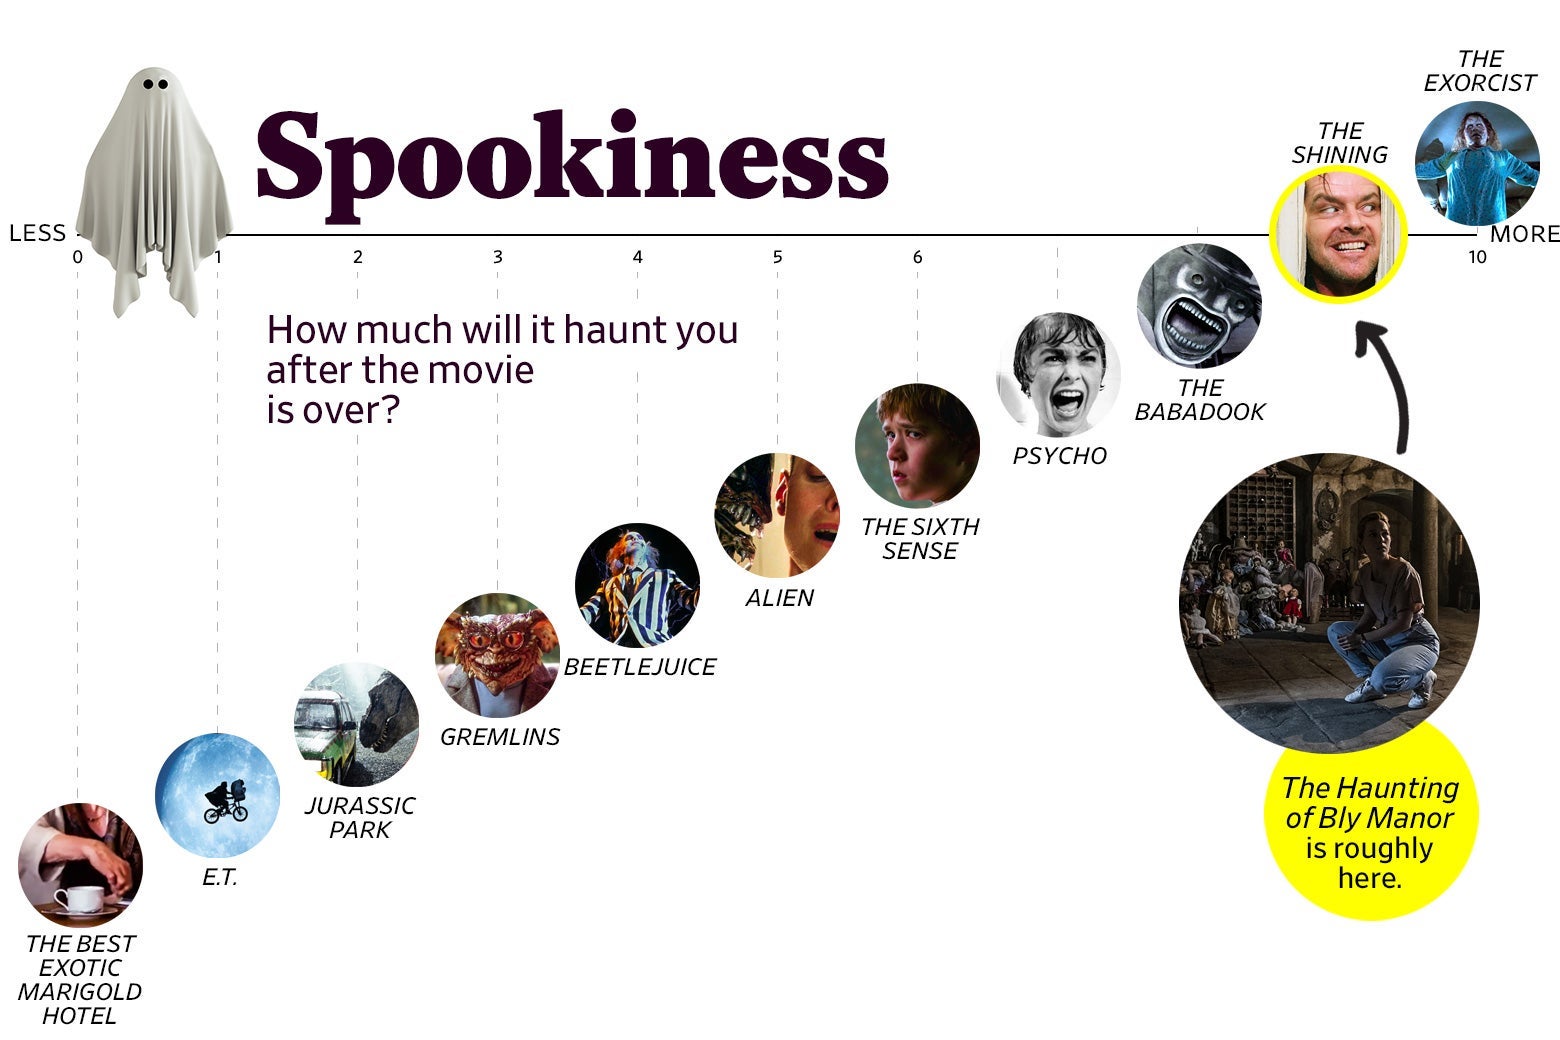 A chart titled “Spookiness: How much will it haunt you after the movie is over?” shows that Bly Manor ranks a 9 in spookiness, roughly the same as The Shining. The scale ranges from The Best Exotic Marigold Hotel (0) to The Exorcist (10).